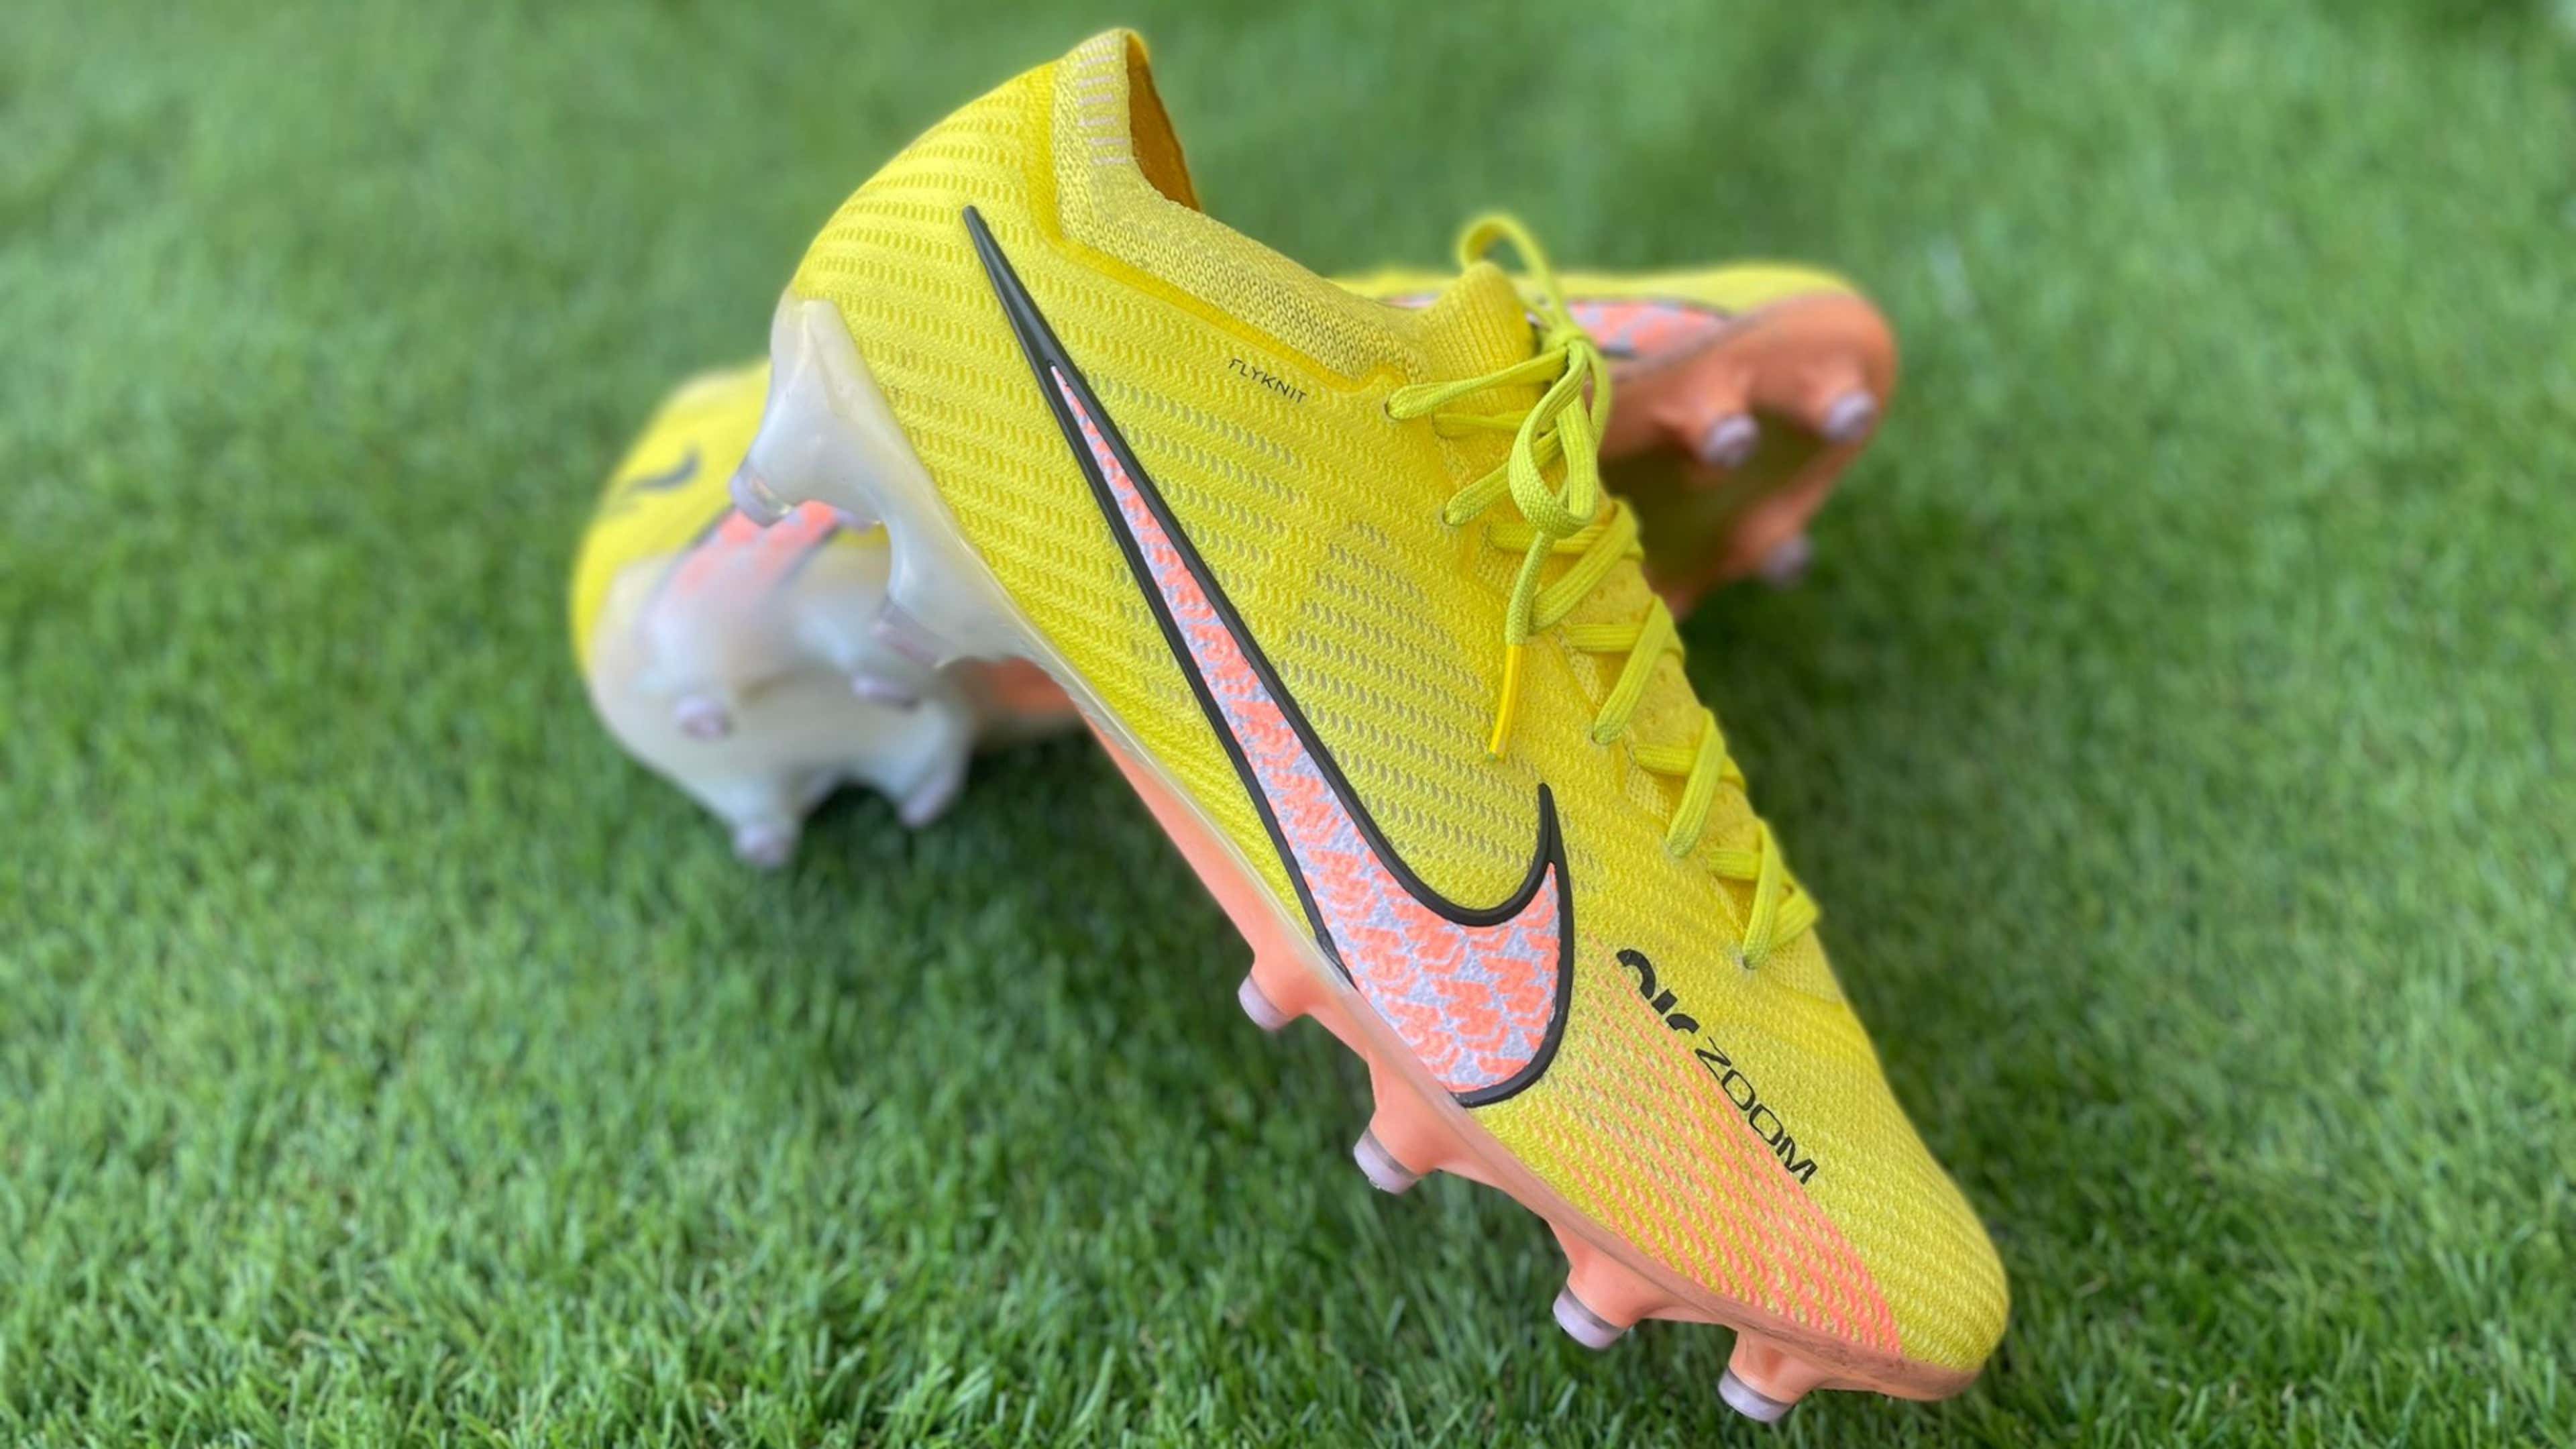 sofa pedal tunnel Nike Zoom Mercurial Vapor Elite FG Boots: Our tried & tested review |  Goal.com